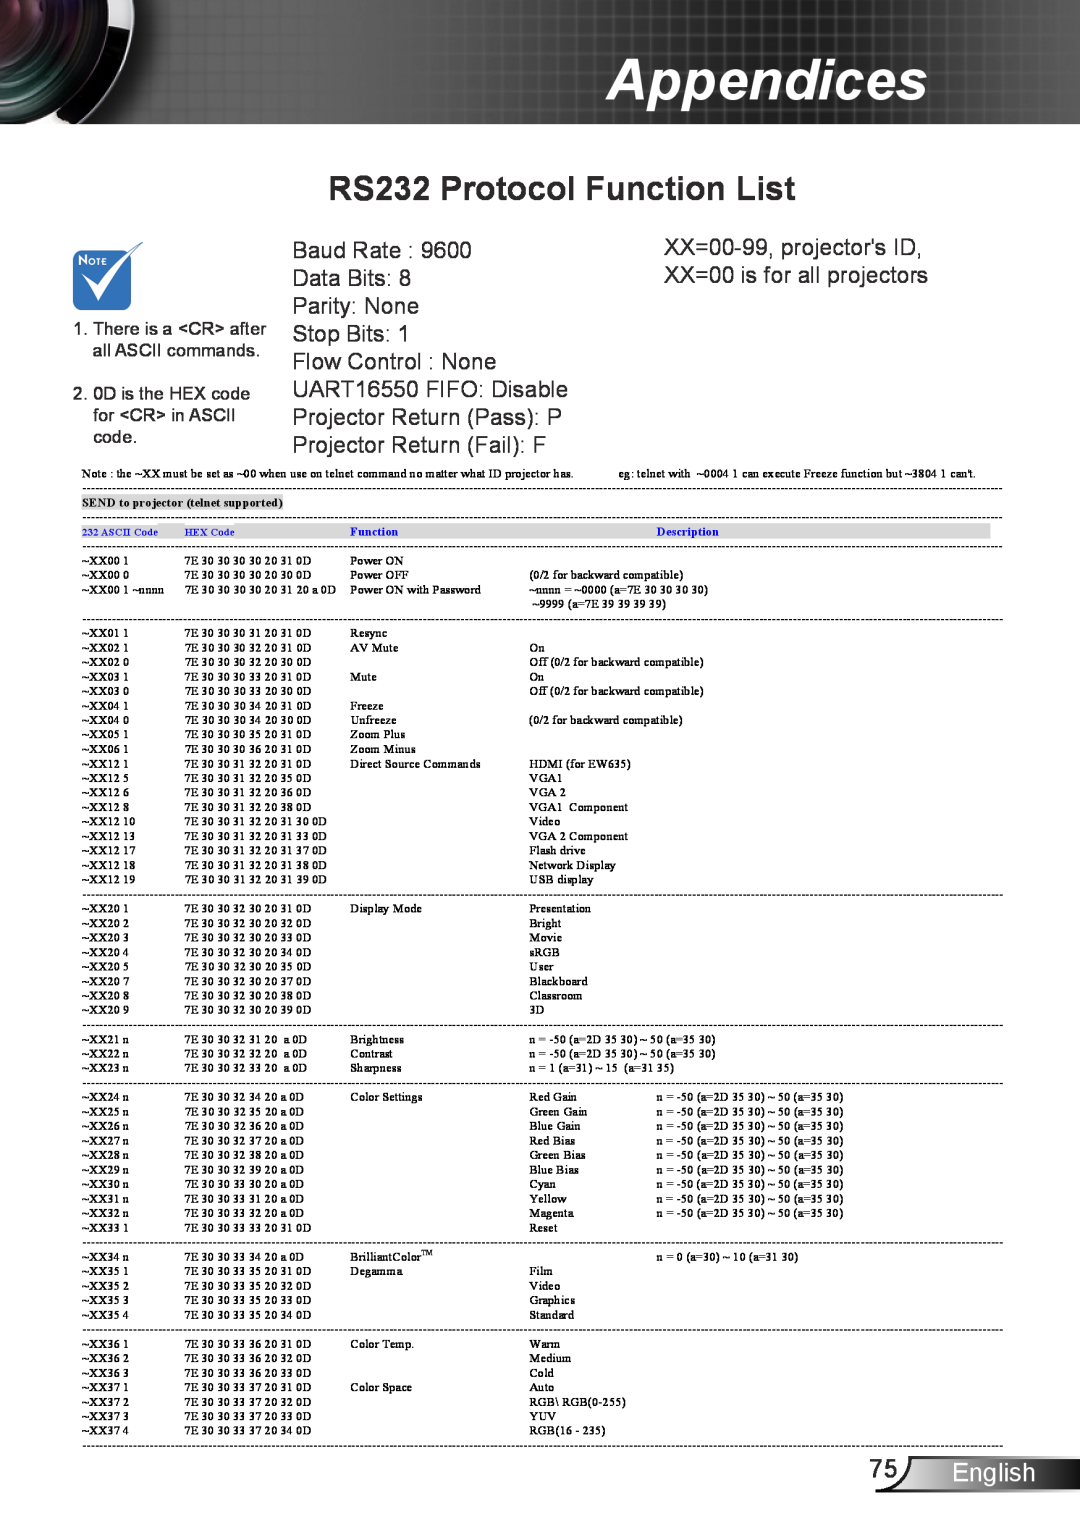 Optoma Technology TX6353D manual RS232 Protocol Function List, English, Appendices, There is a CR after all ASCII commands 